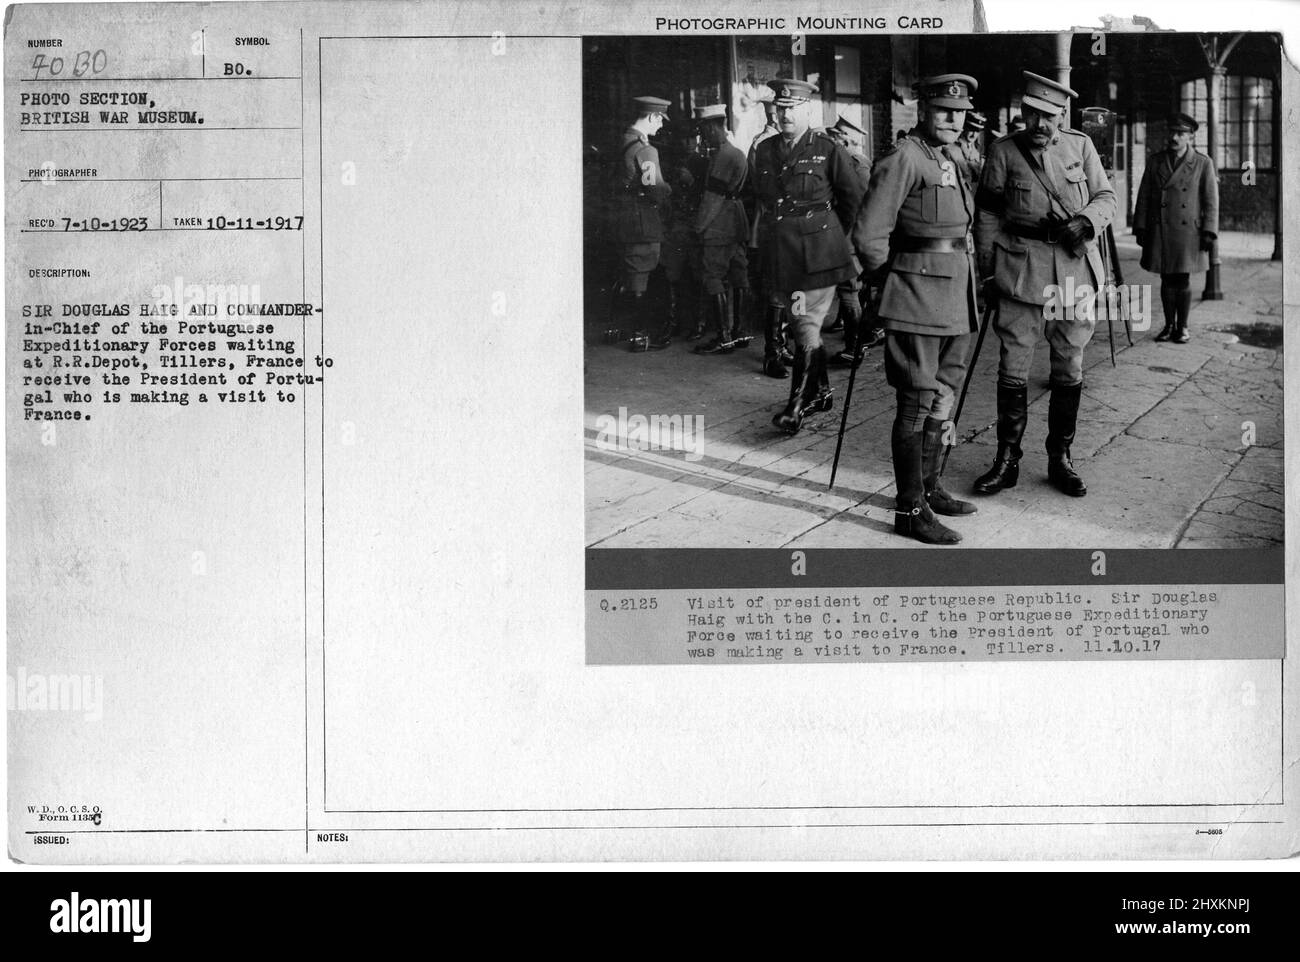 Sir Douglas Haig and Commander-in-Chief of the Portuguese Expeditionary Forces waiting at R.R. Depot, Tillers, France to receive the President of Portugal who is making a visit to France. Collection of World War I Photographs, 1914-1918 that depict the military activities of British and other nation's armed forces and personnel during World War I. Stock Photo